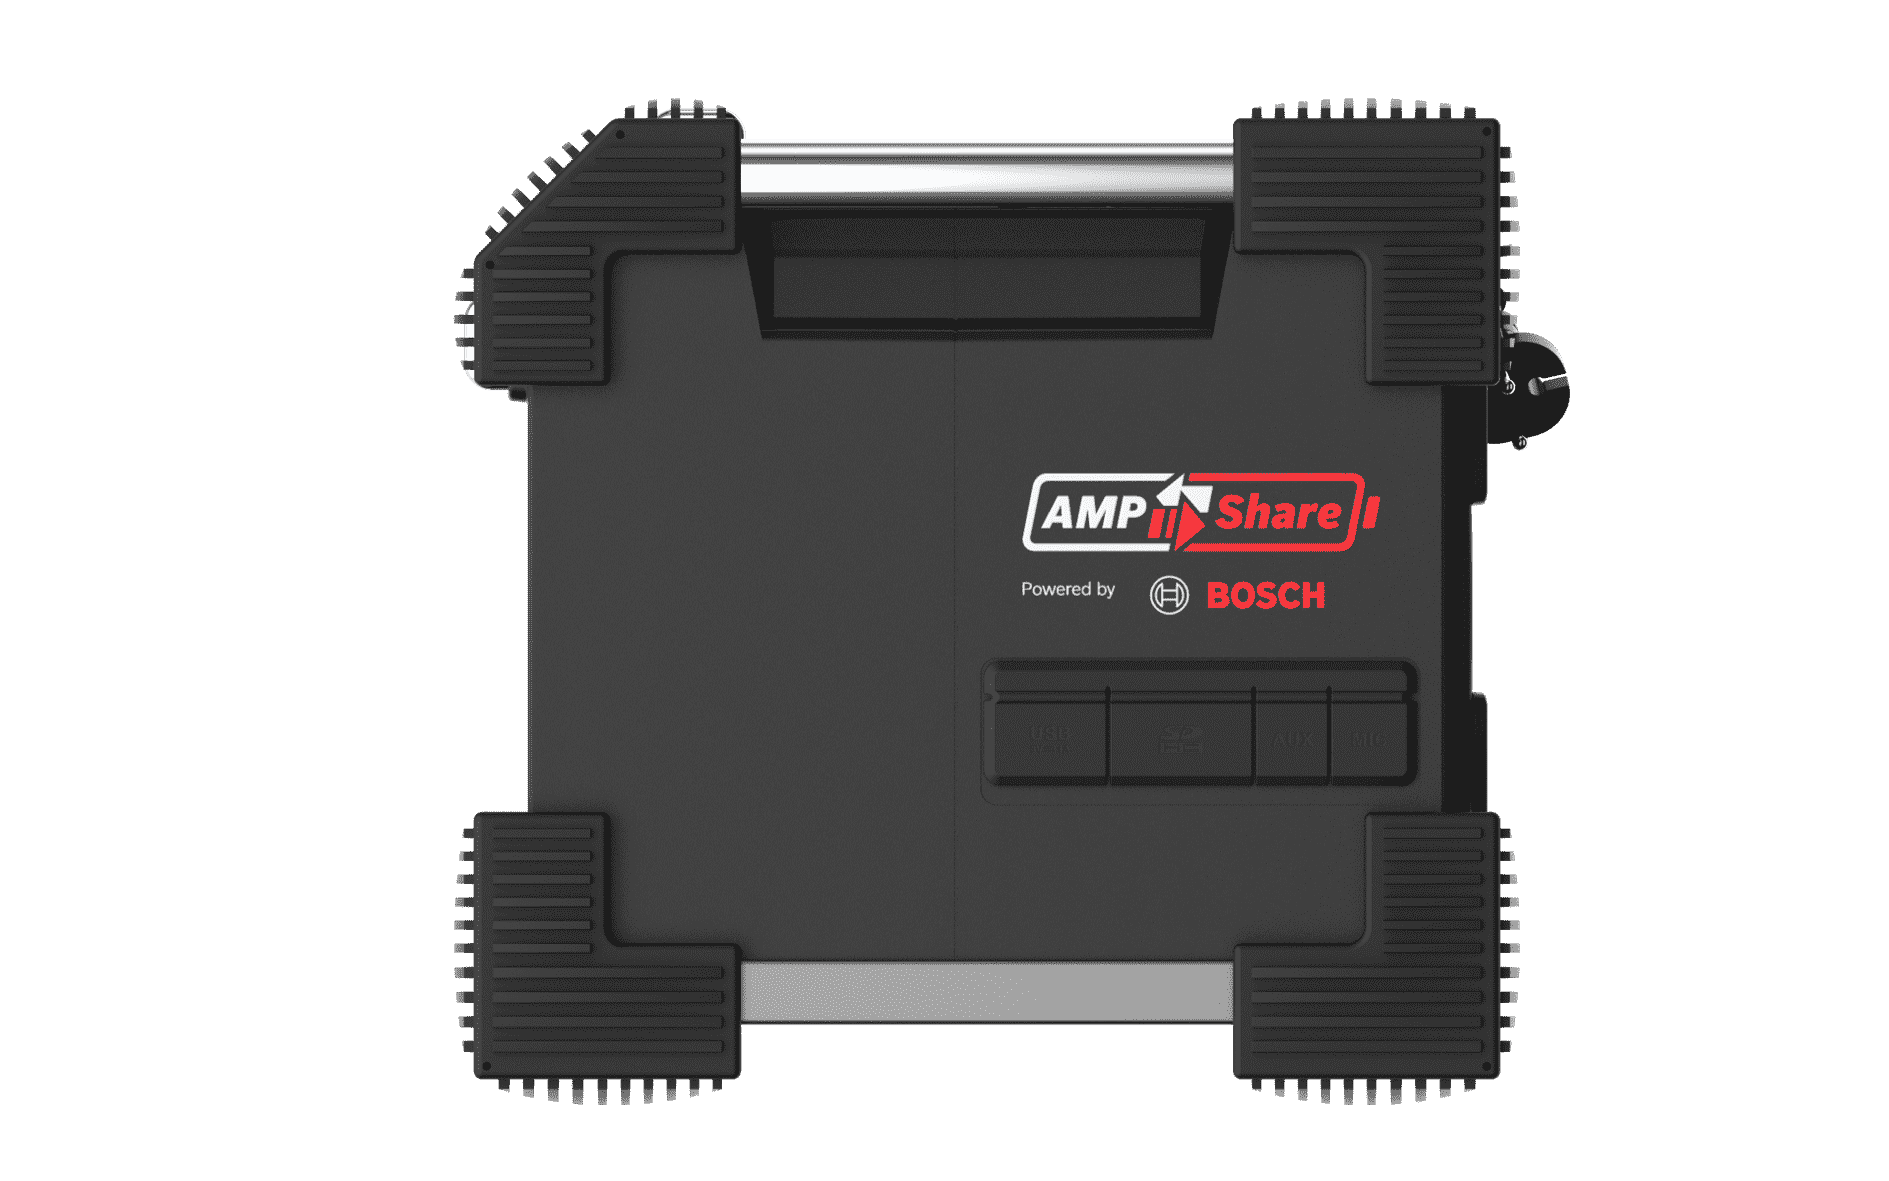 Rockhart 18V AMPShare - Powered by Bosch